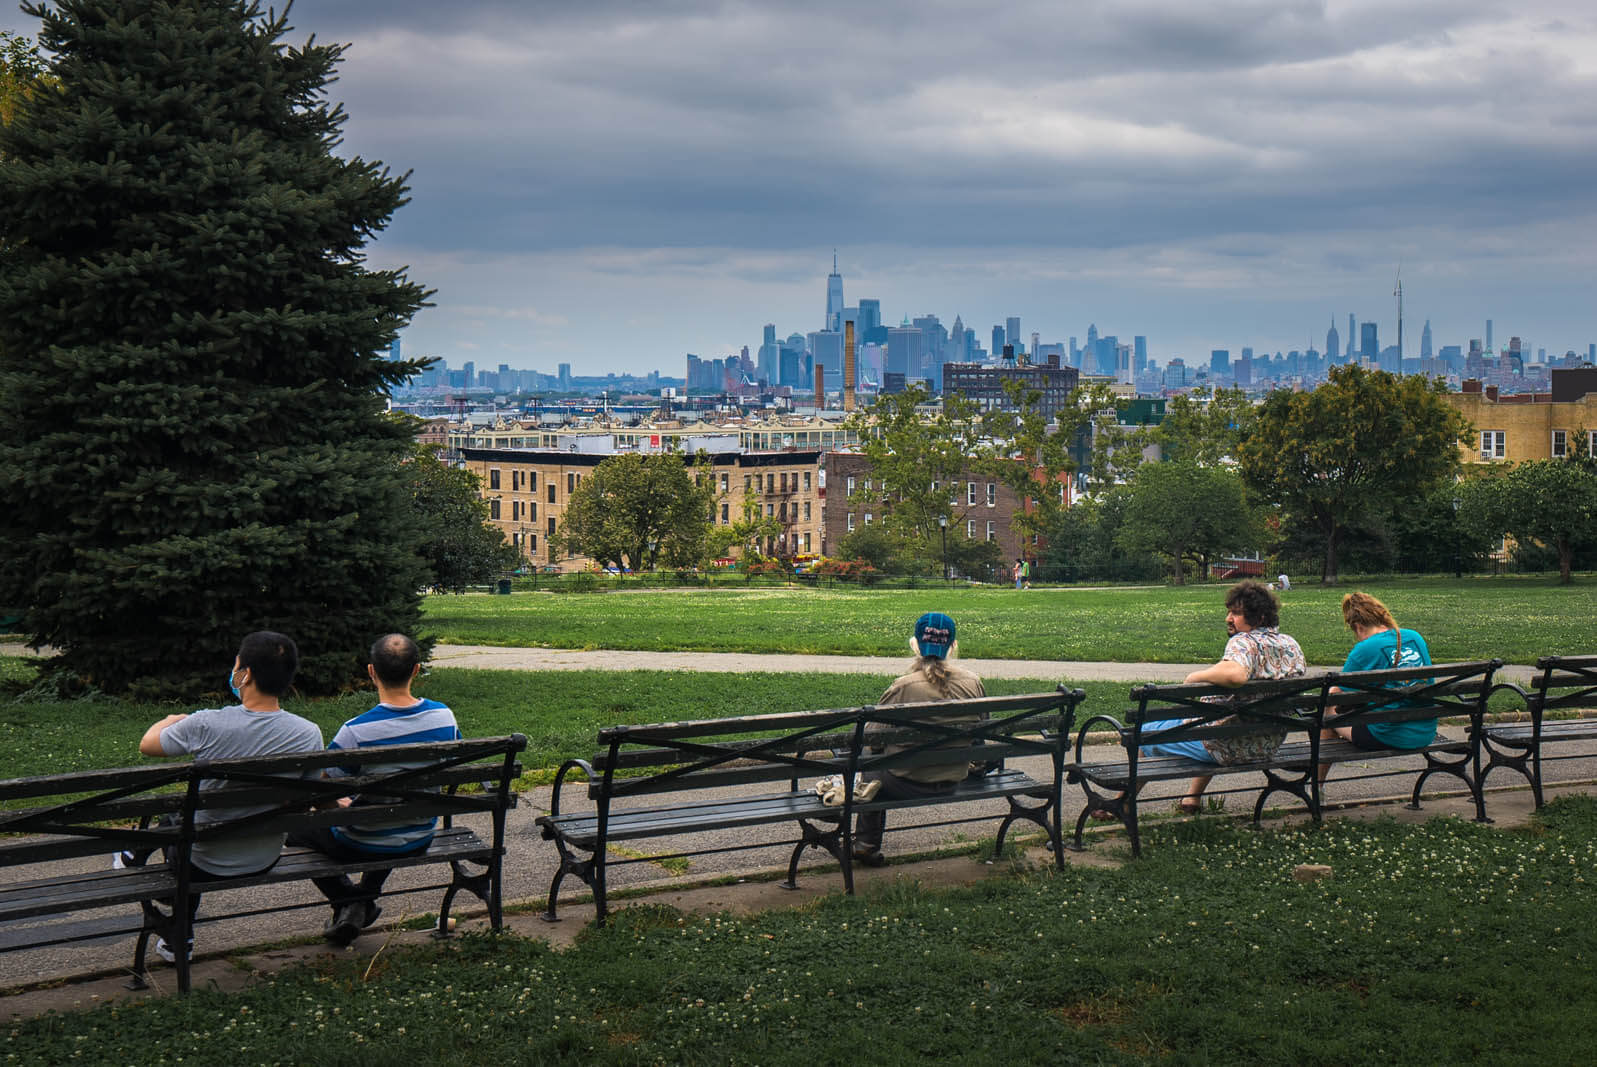 people enjoying the view of the lower manhattan skyline from sunset park in Brooklyn